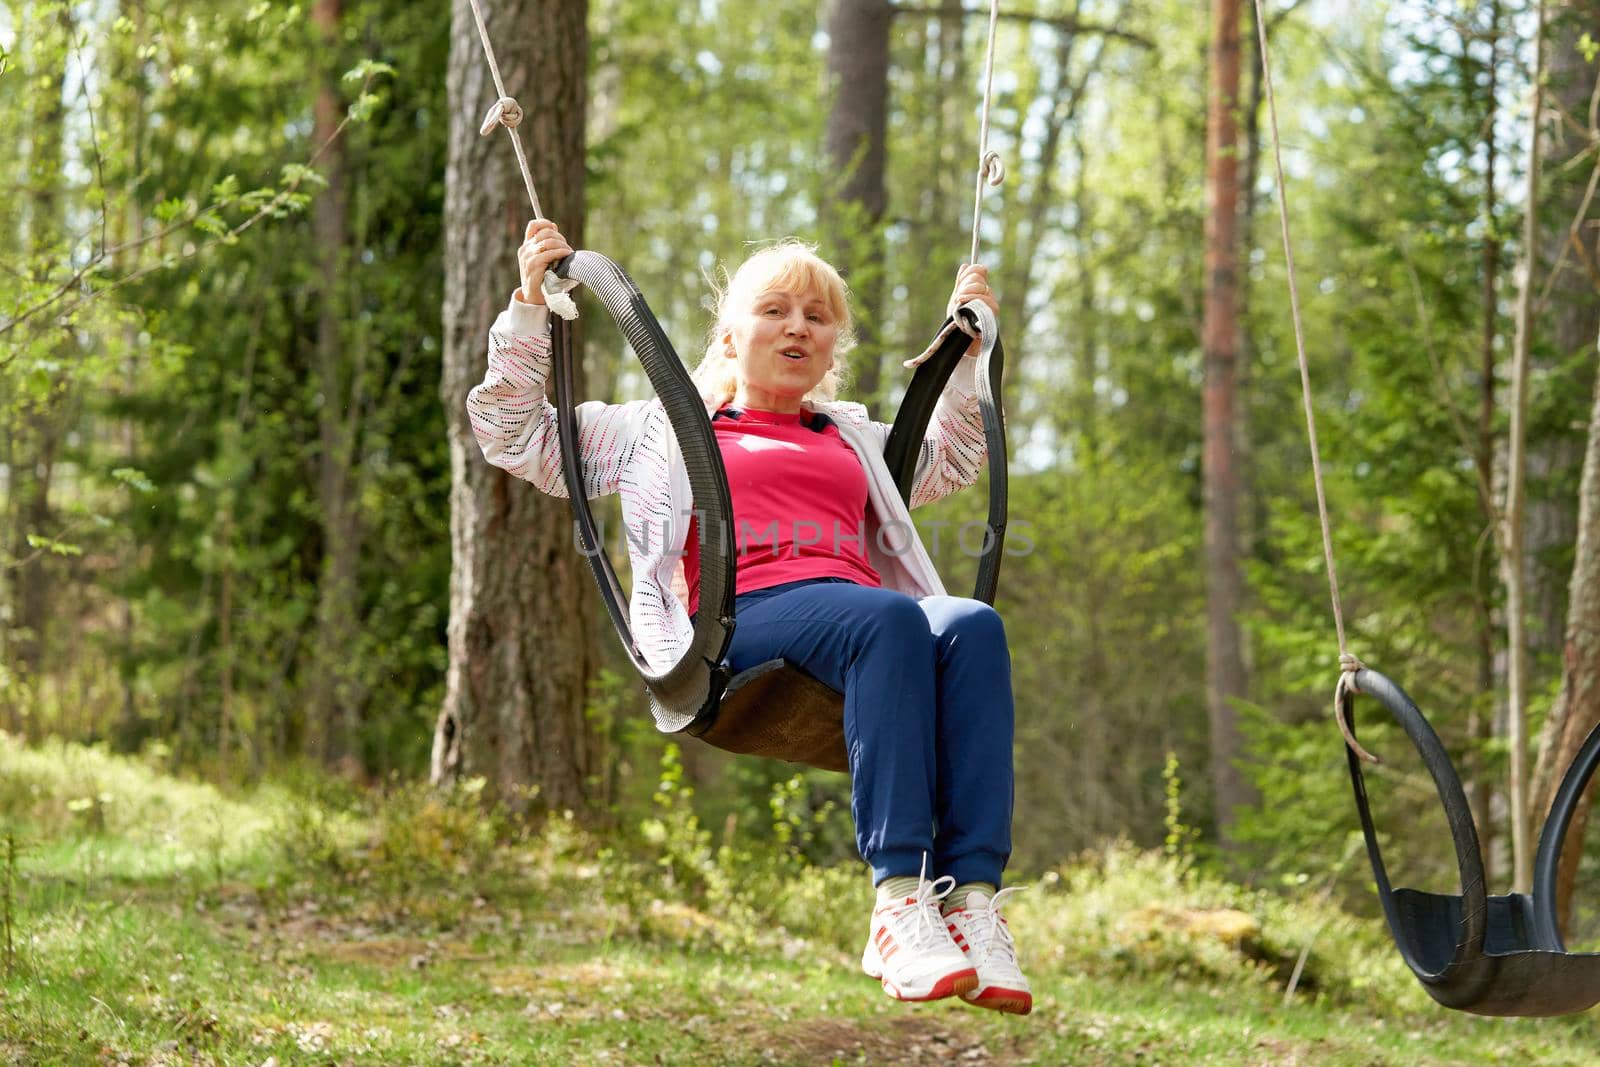 Middle aged woman in the woods swinging on a swing made from an old car tire by vizland